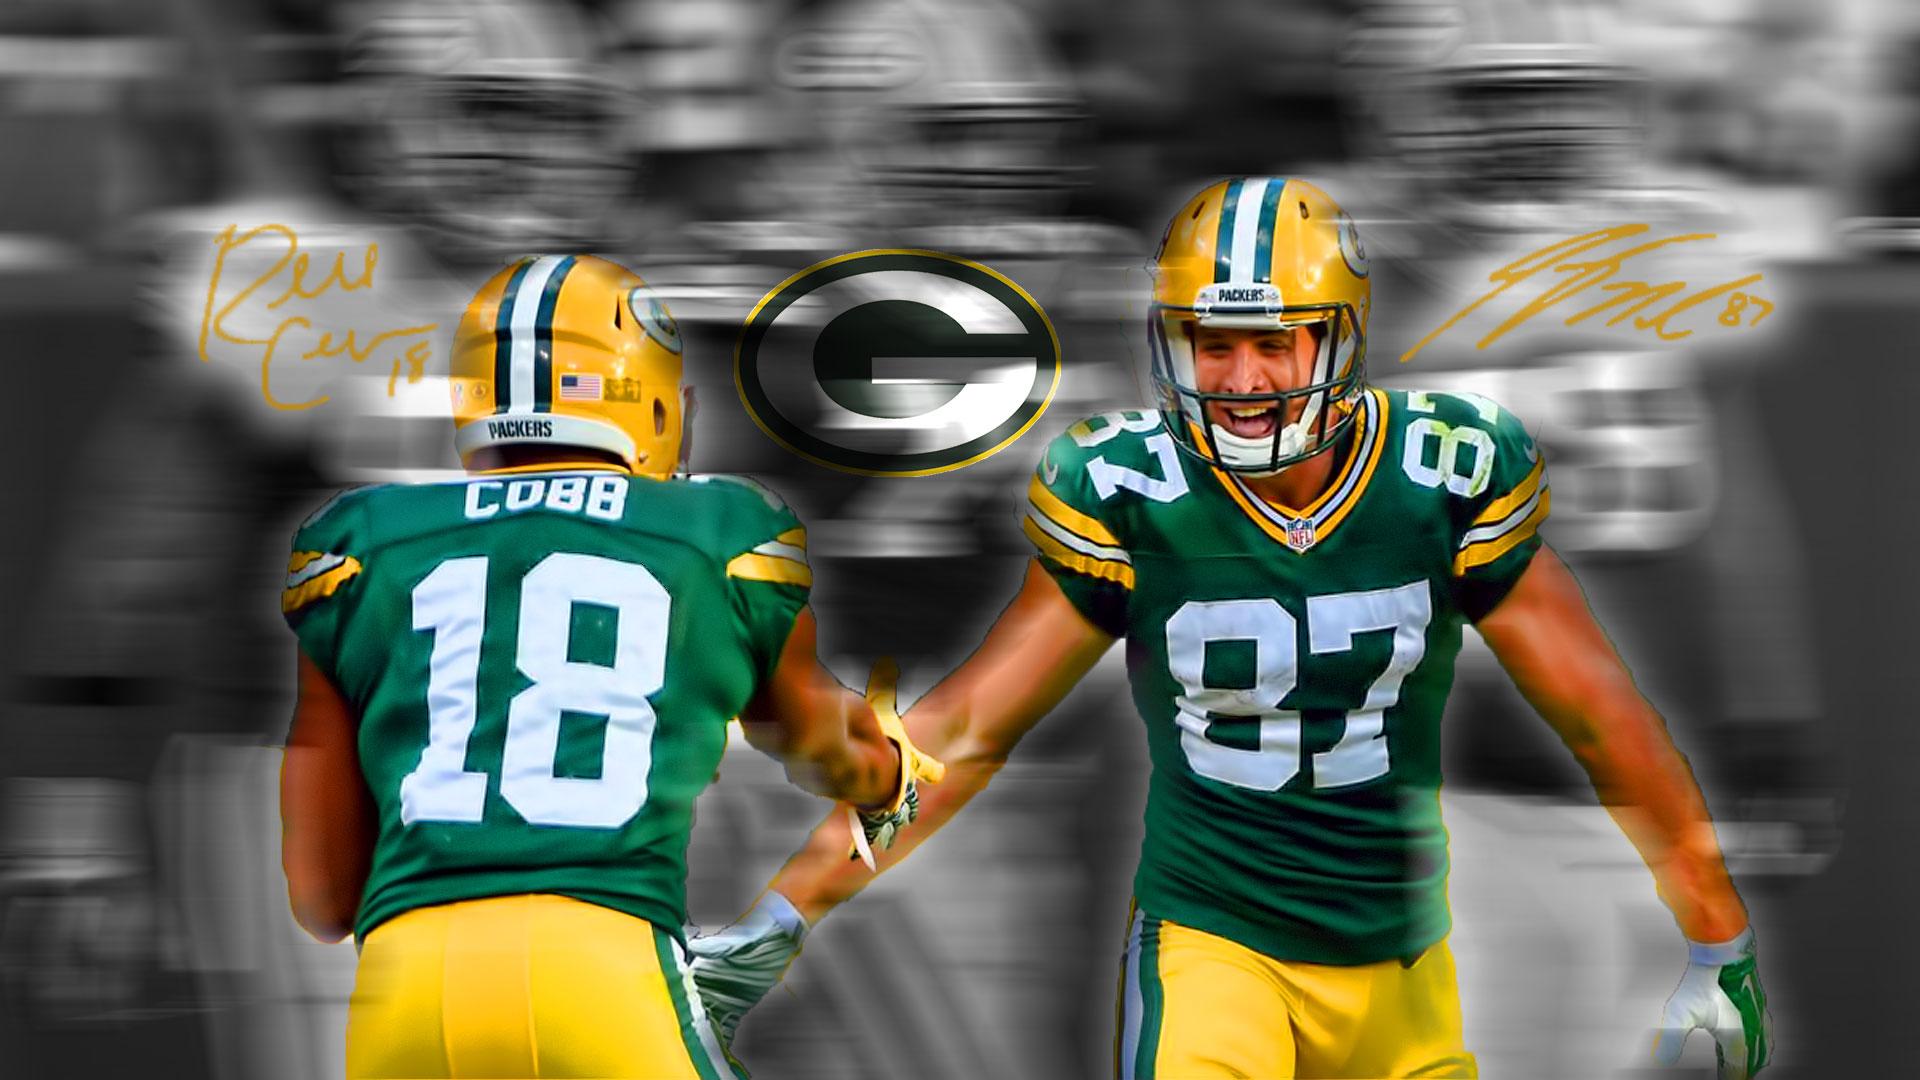 Someone said they really wanted a Jordy and Aaron wallpaper